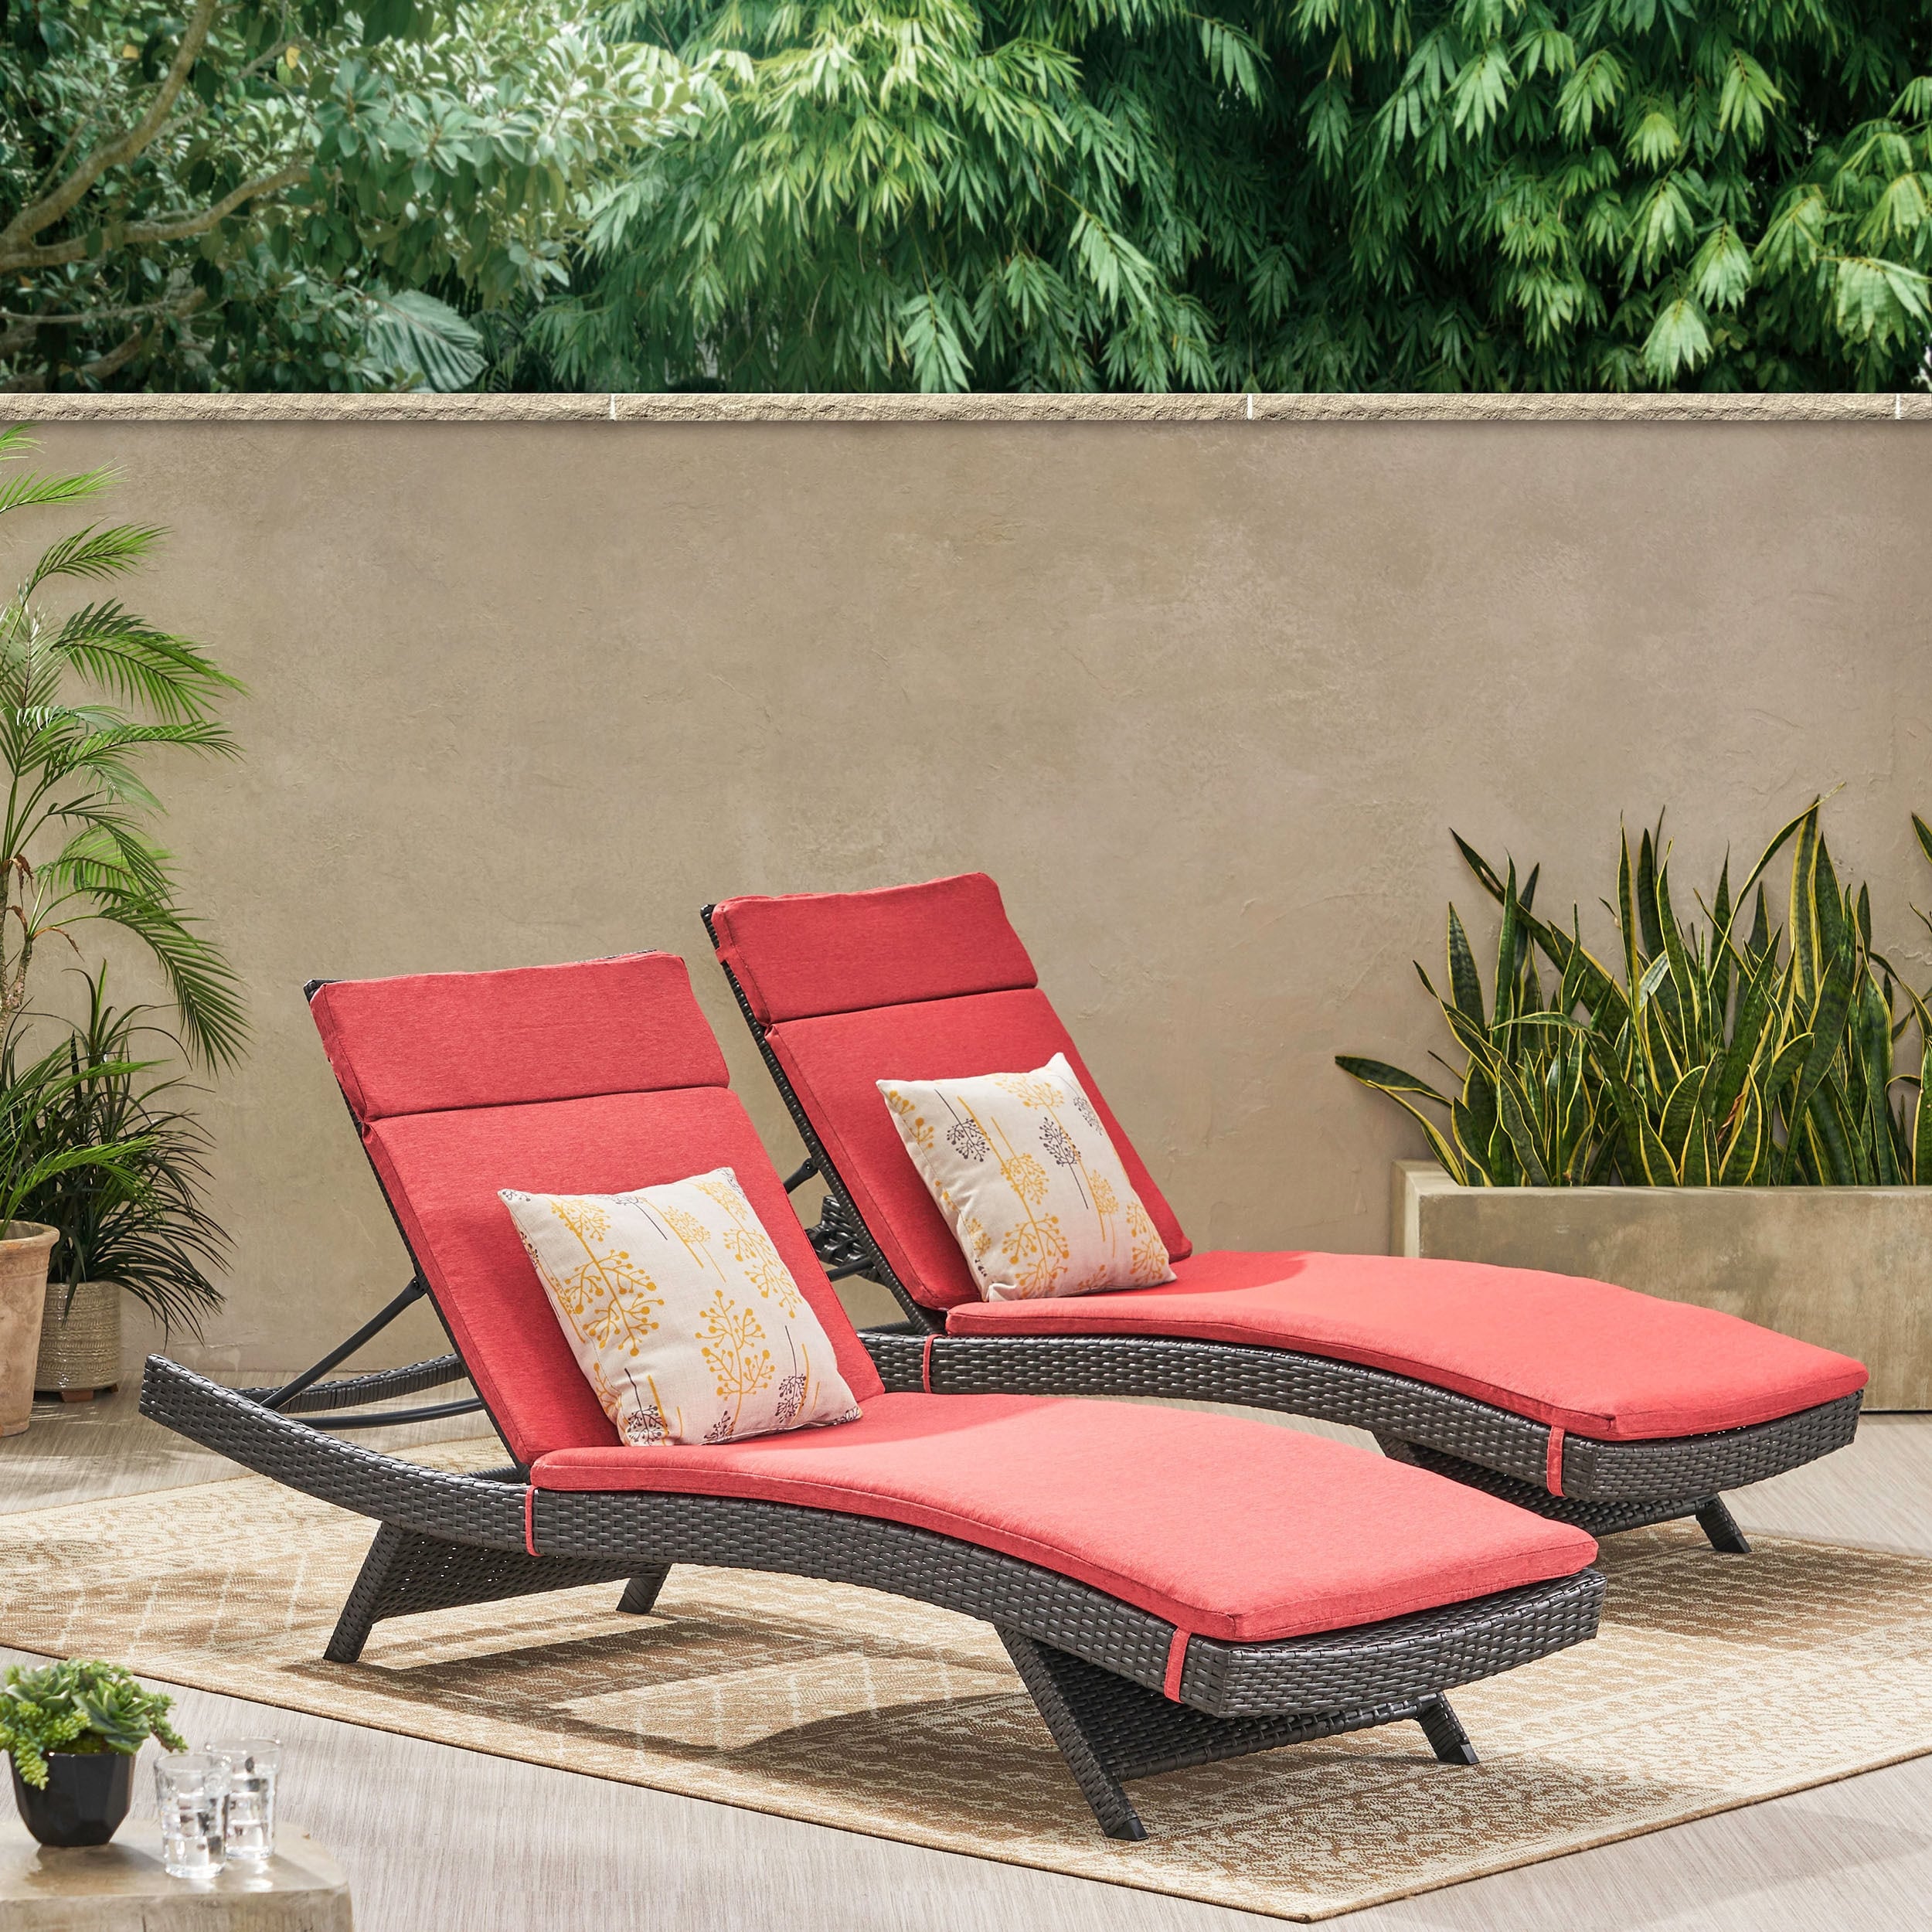 Salem Outdoor Chaise Lounge with Cushion - image 5 of 5